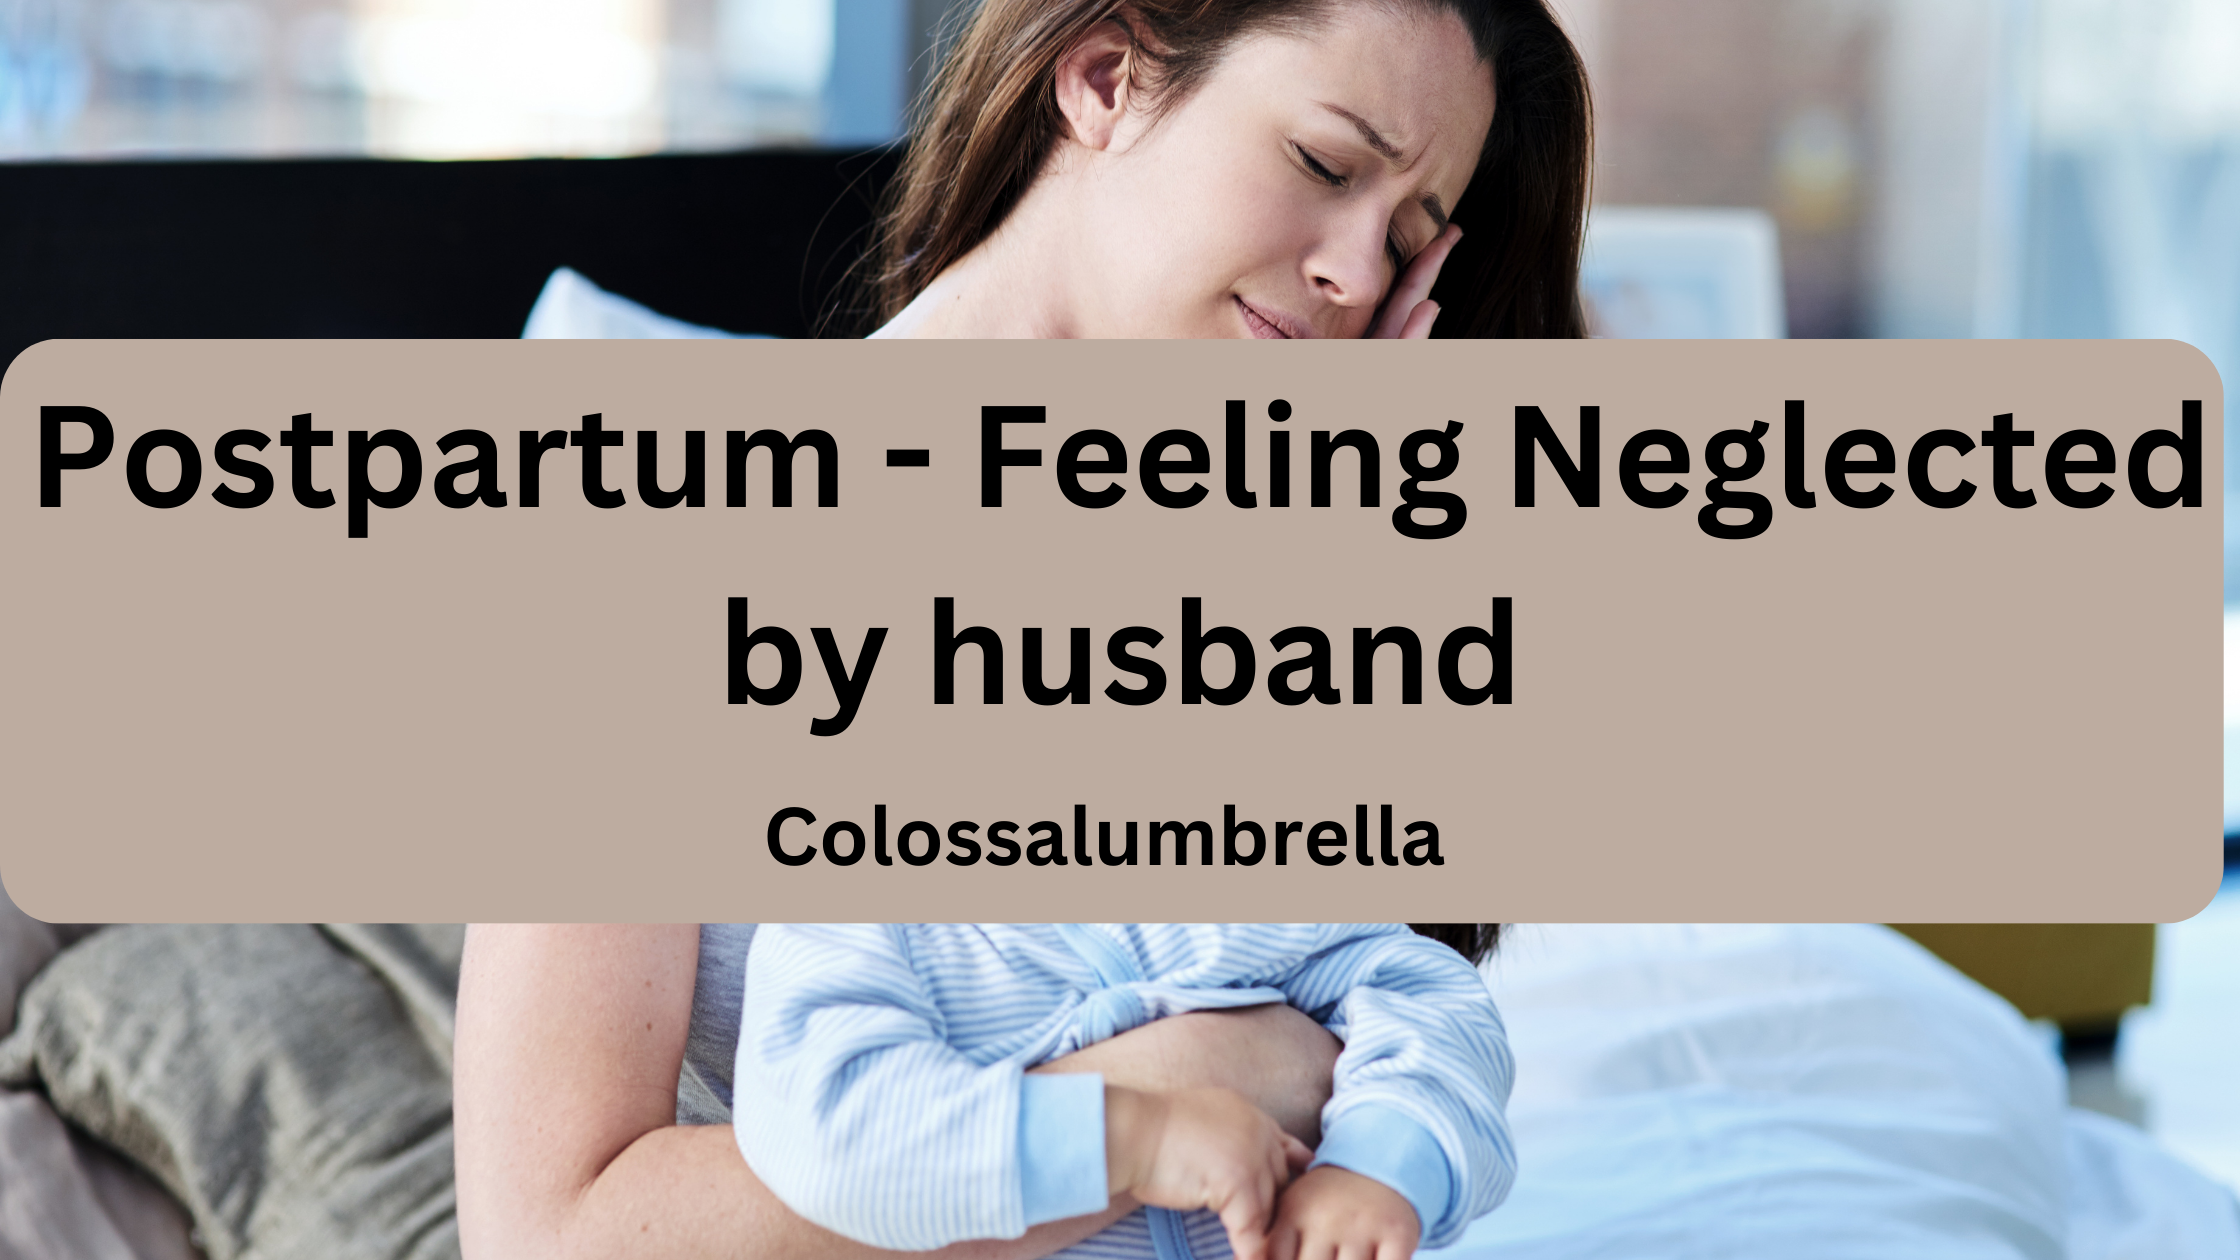 20 Easy Tips for when feeling neglected by husband after baby